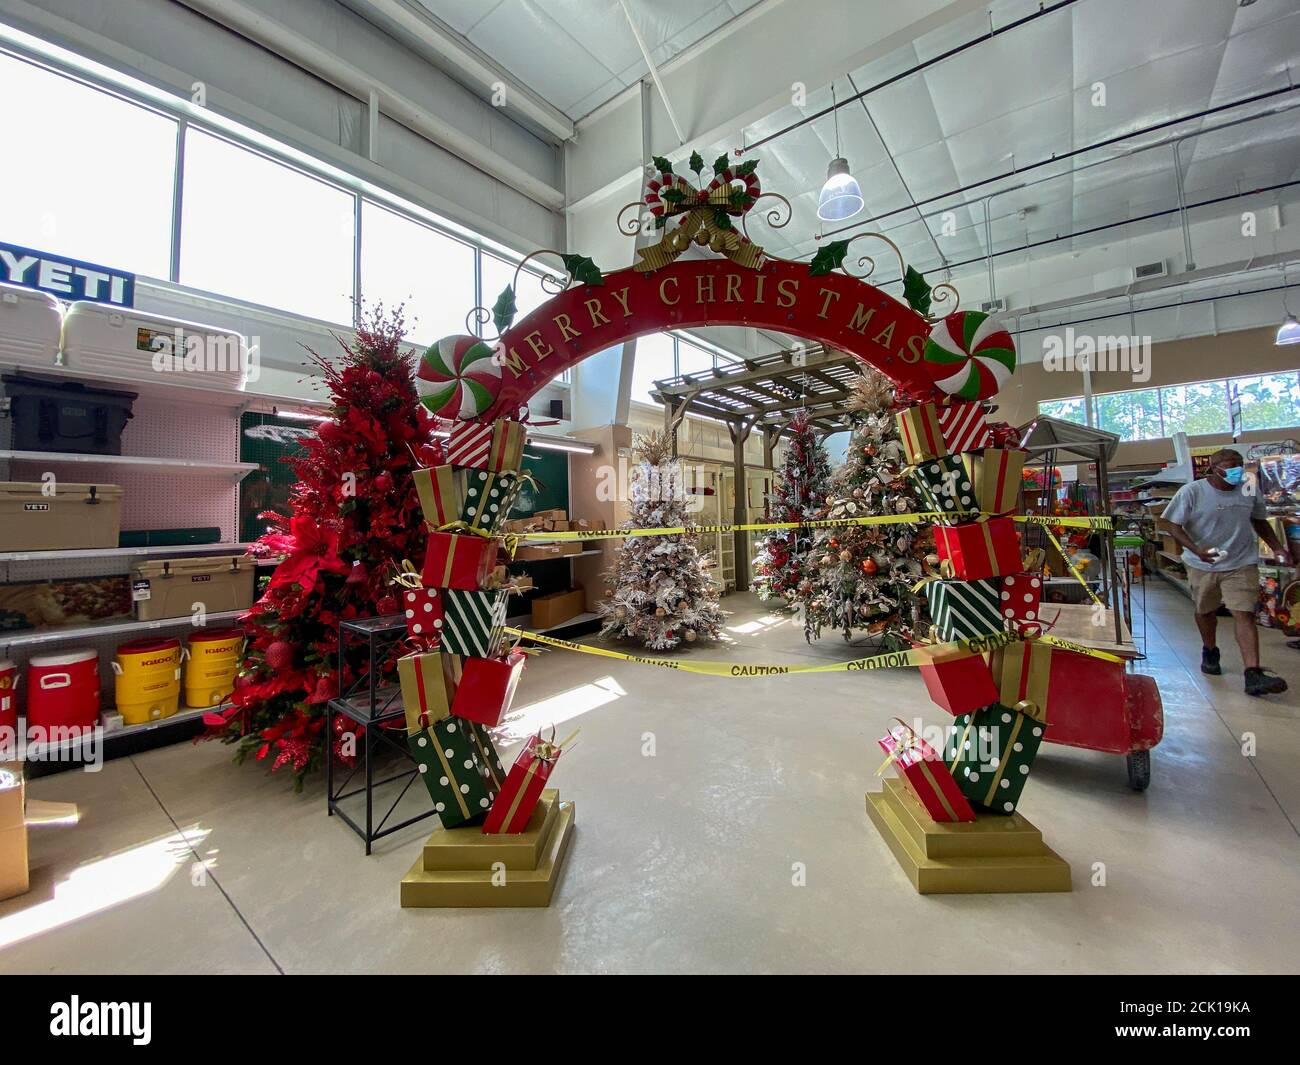 Orlando,FL/USA-9/5/20:  A Christmas decor display being constructed at an Ace Hardware retail store in Orlando, Florida. Stock Photo